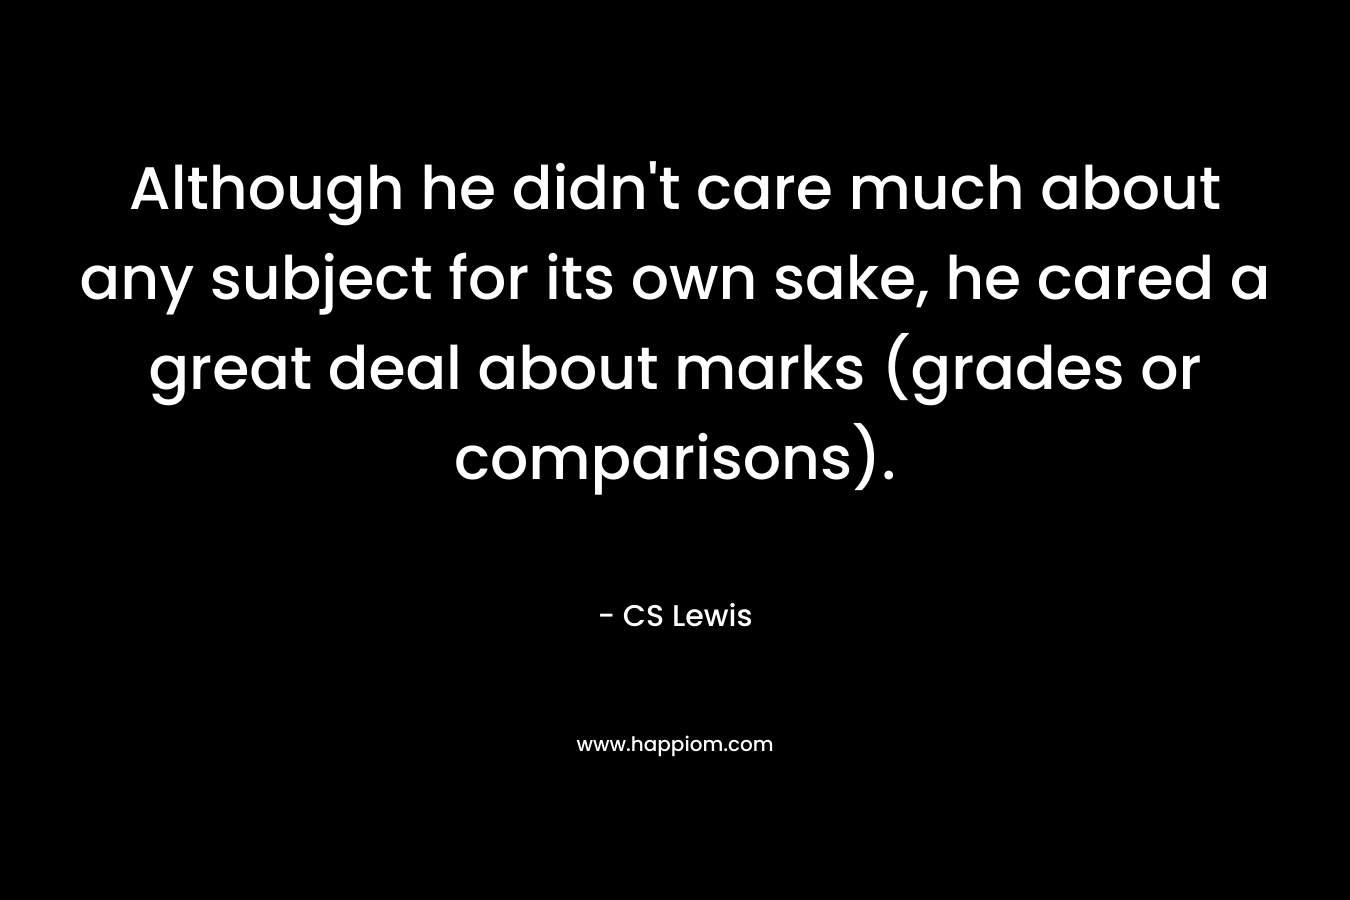 Although he didn’t care much about any subject for its own sake, he cared a great deal about marks (grades or comparisons). – CS Lewis